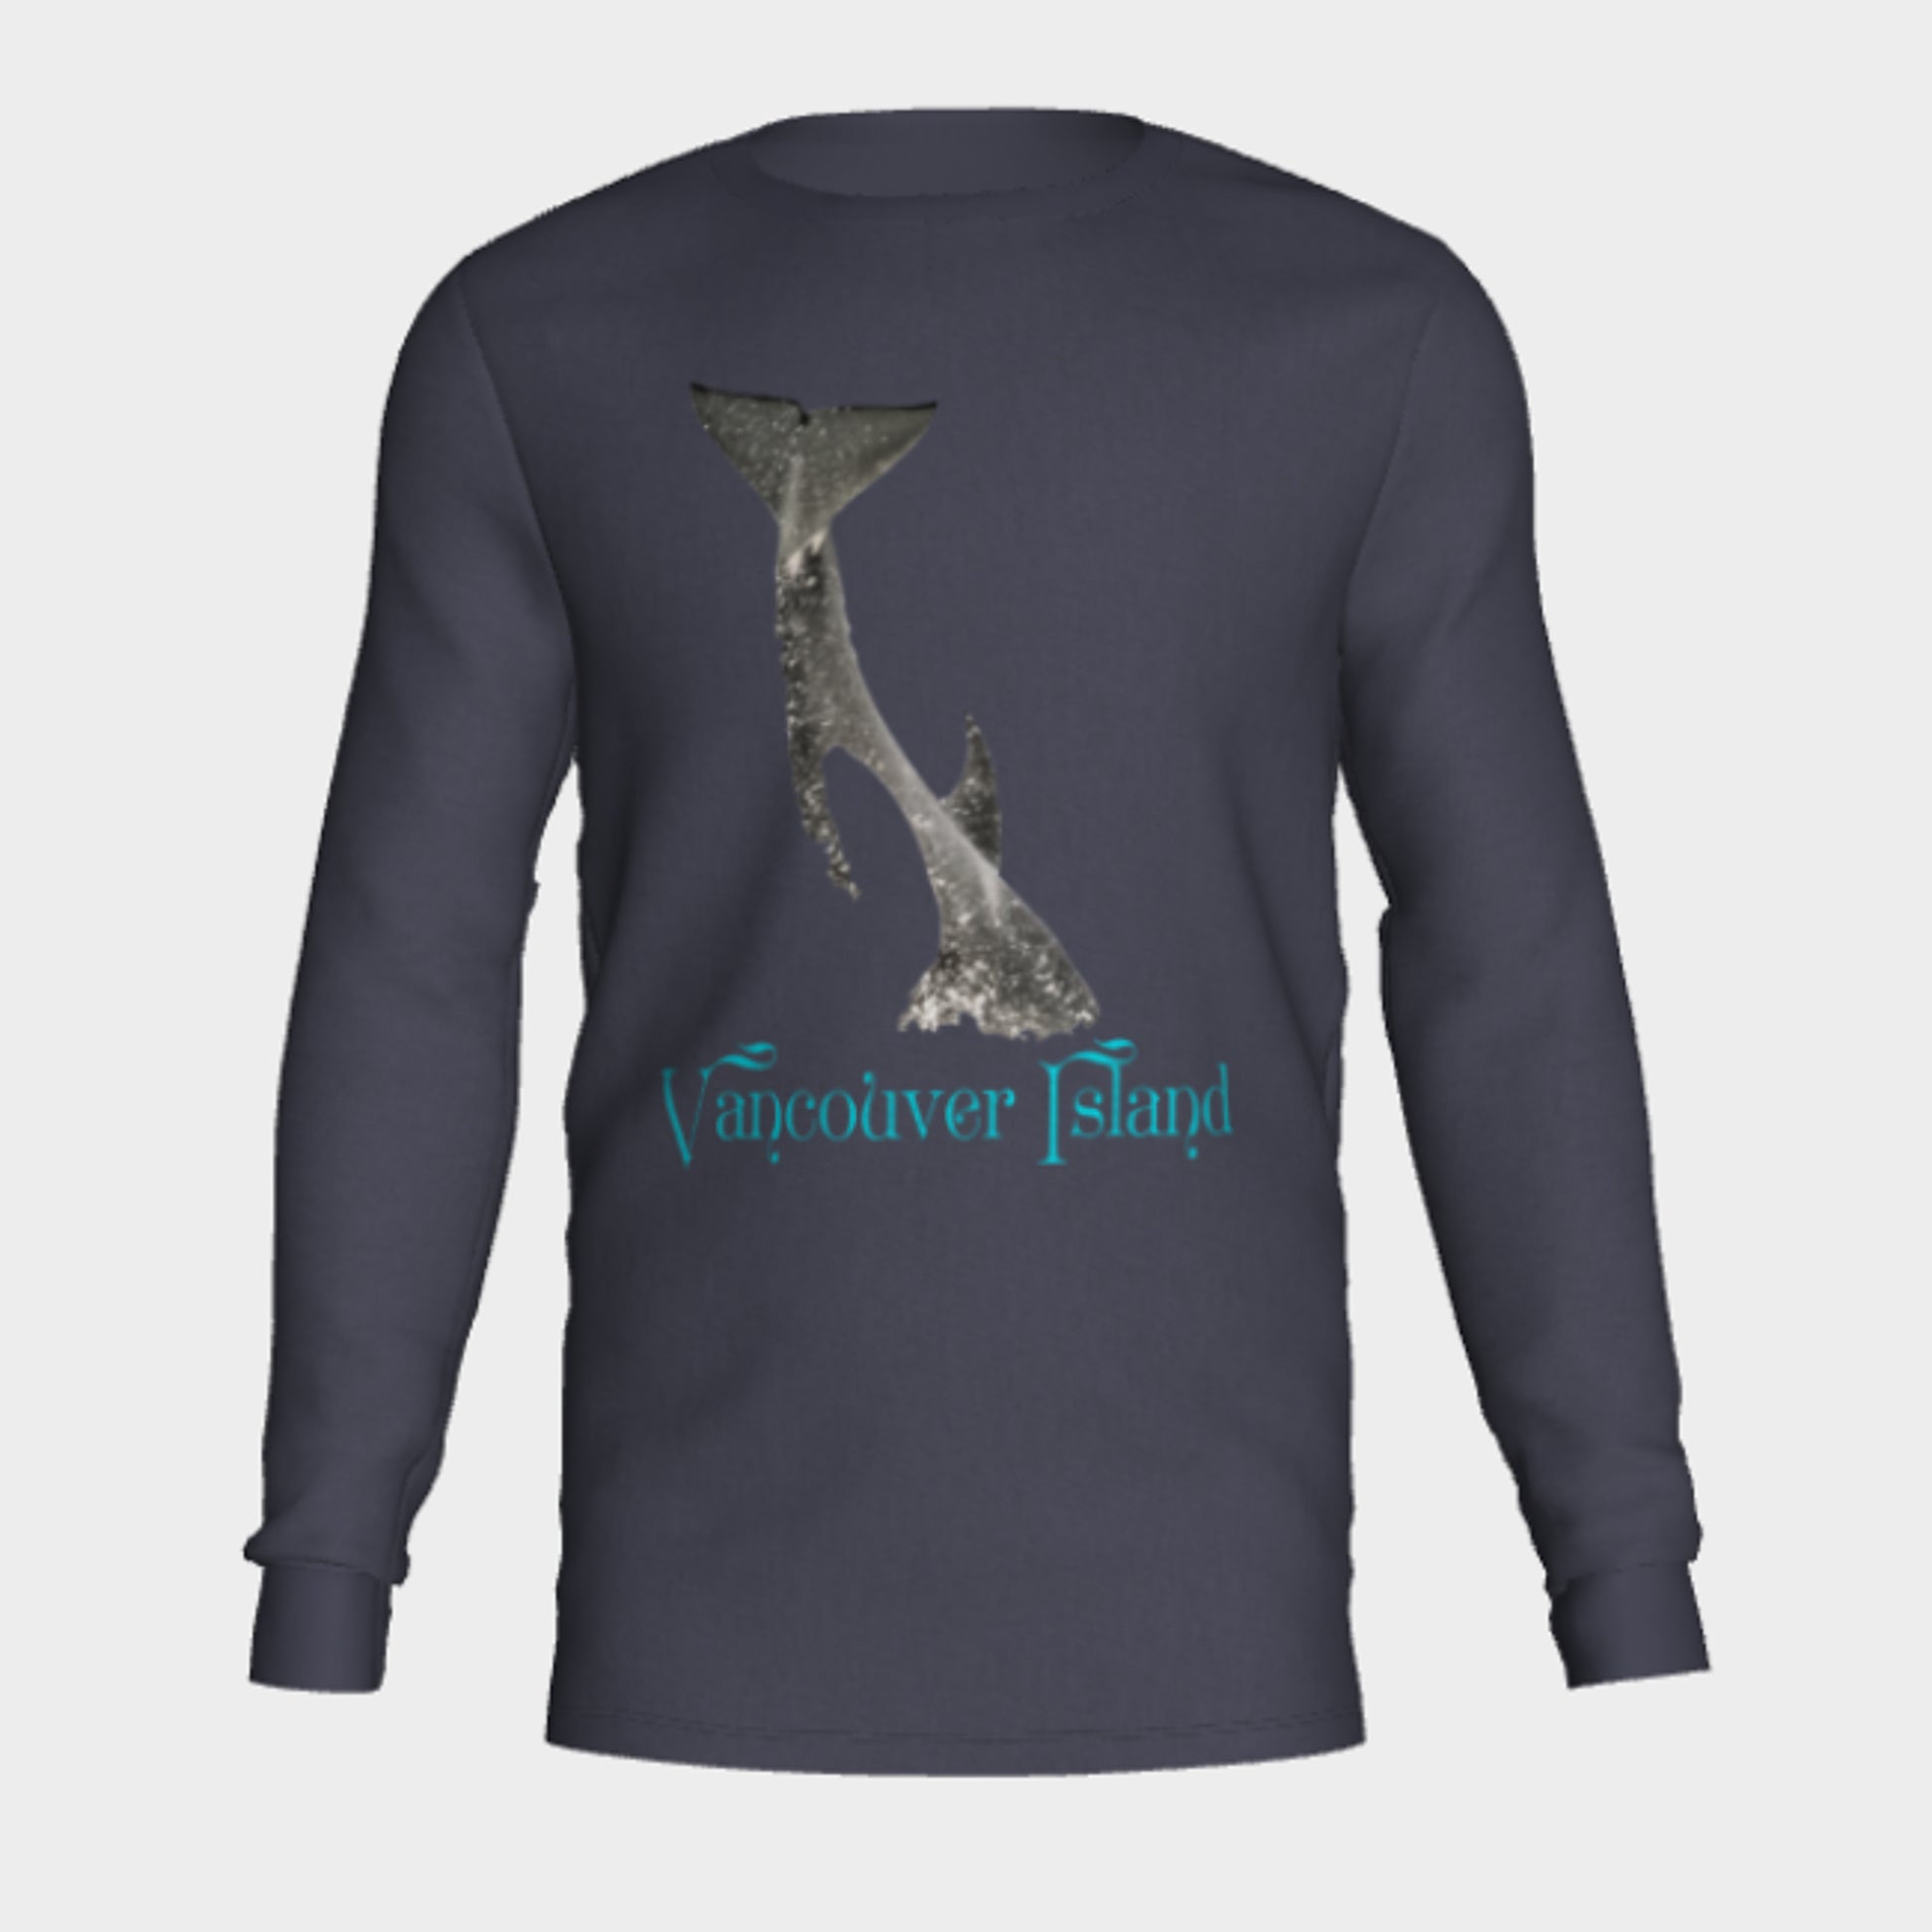 Van Isle Goddess 100% cotton crew neck long sleeve super comfy tee is a must-have basic for any wardrobe.   Features:  Flattering unisex fit Cozy long sleeves Crew neck Made with Milltex lightweight fabric Sizes small to 2XL